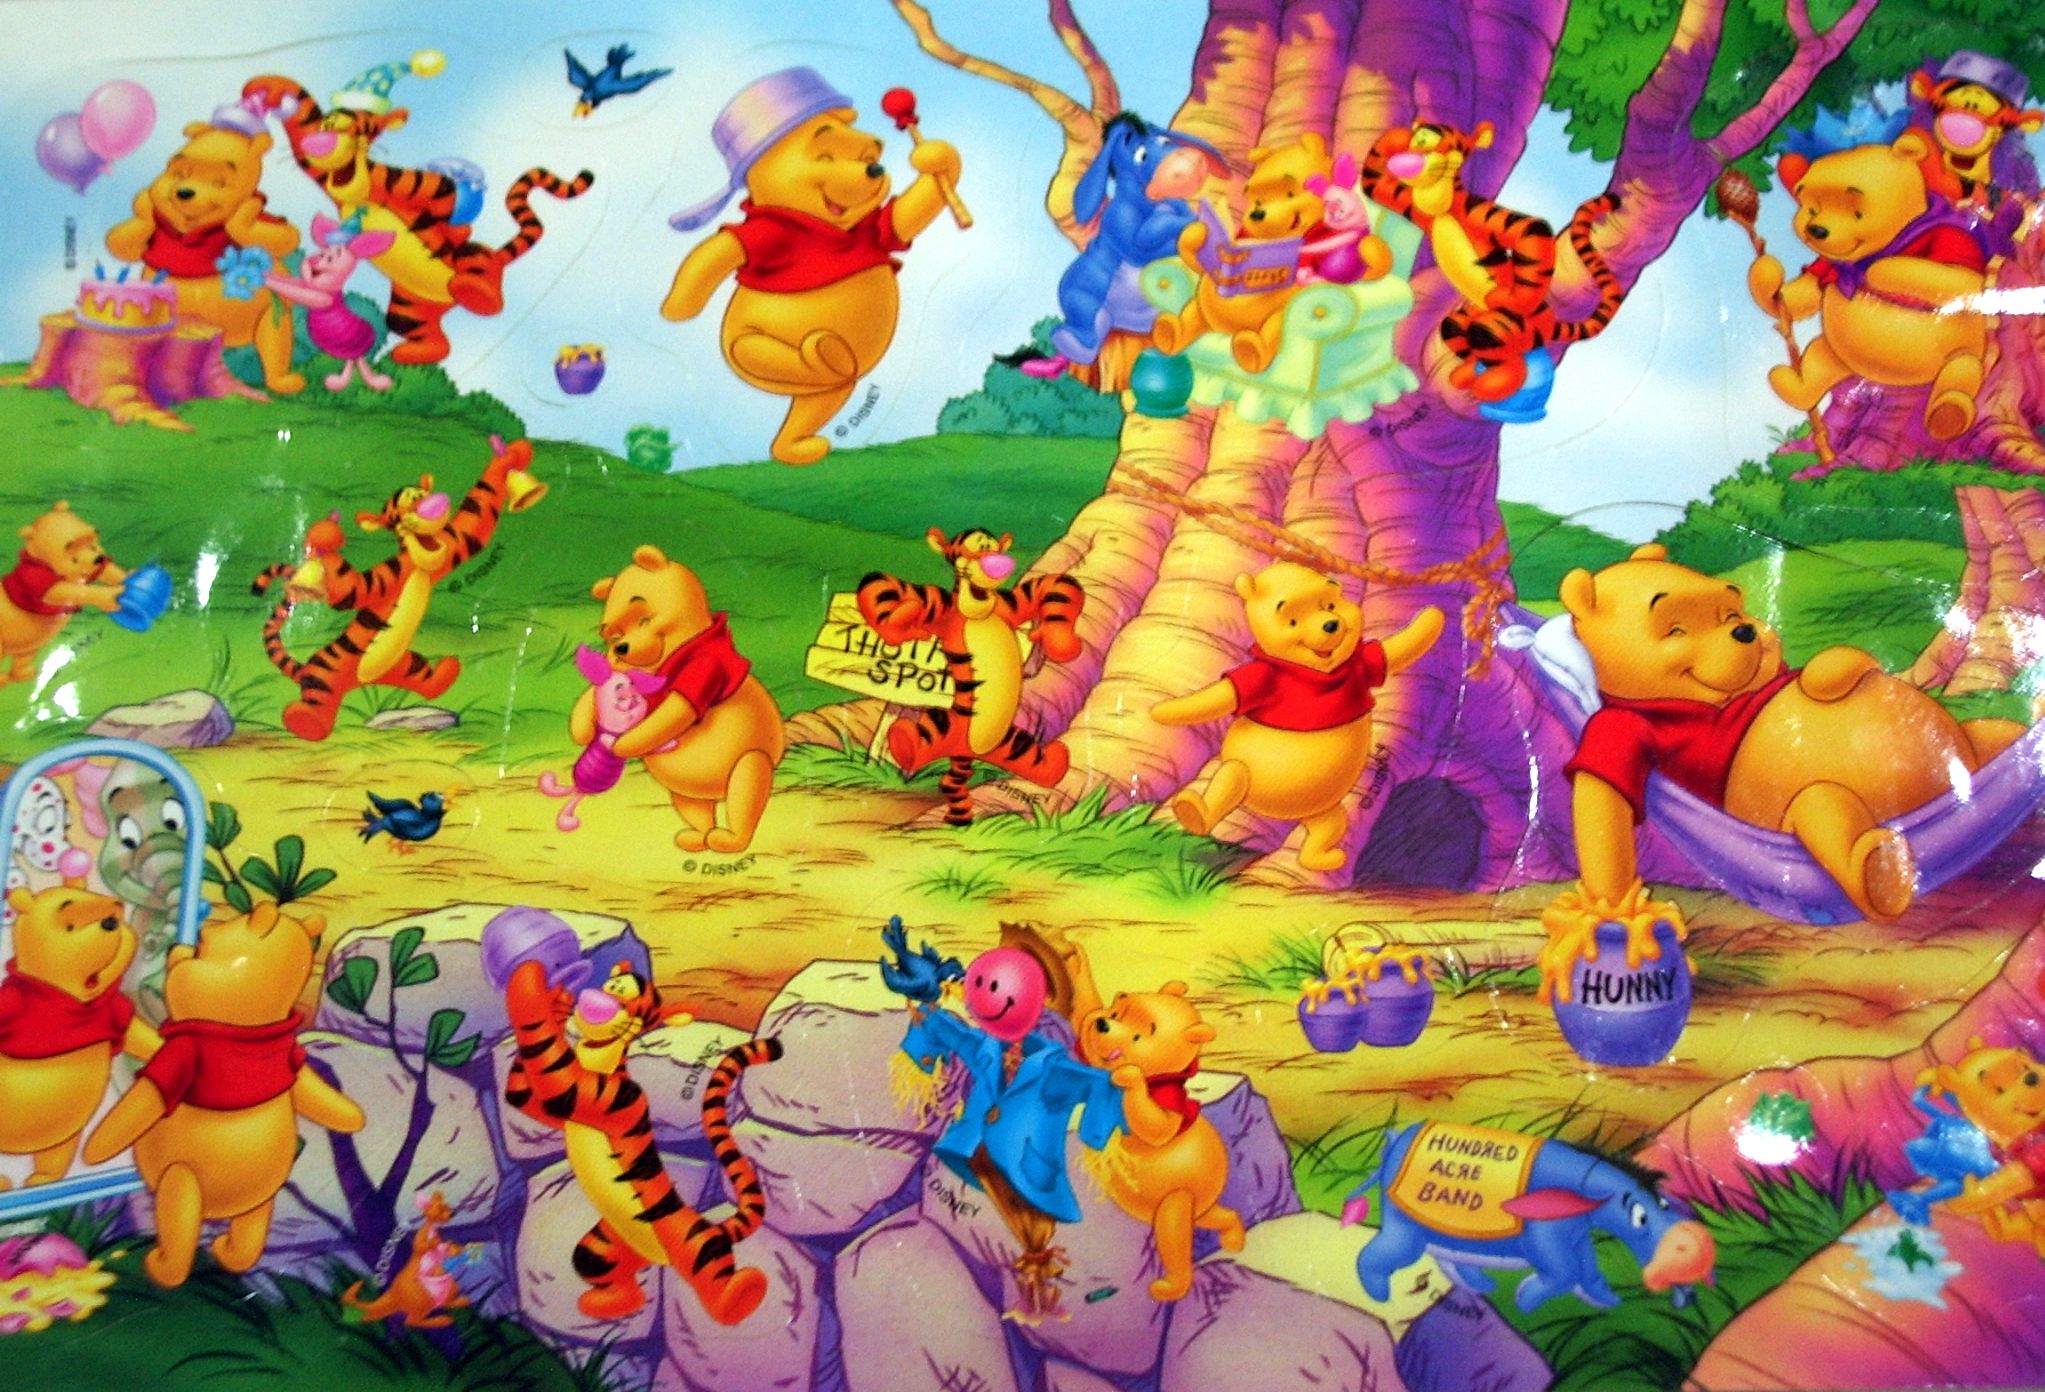 83 Winnie The Pooh HD Wallpapers | Backgrounds - Wallpaper Abyss